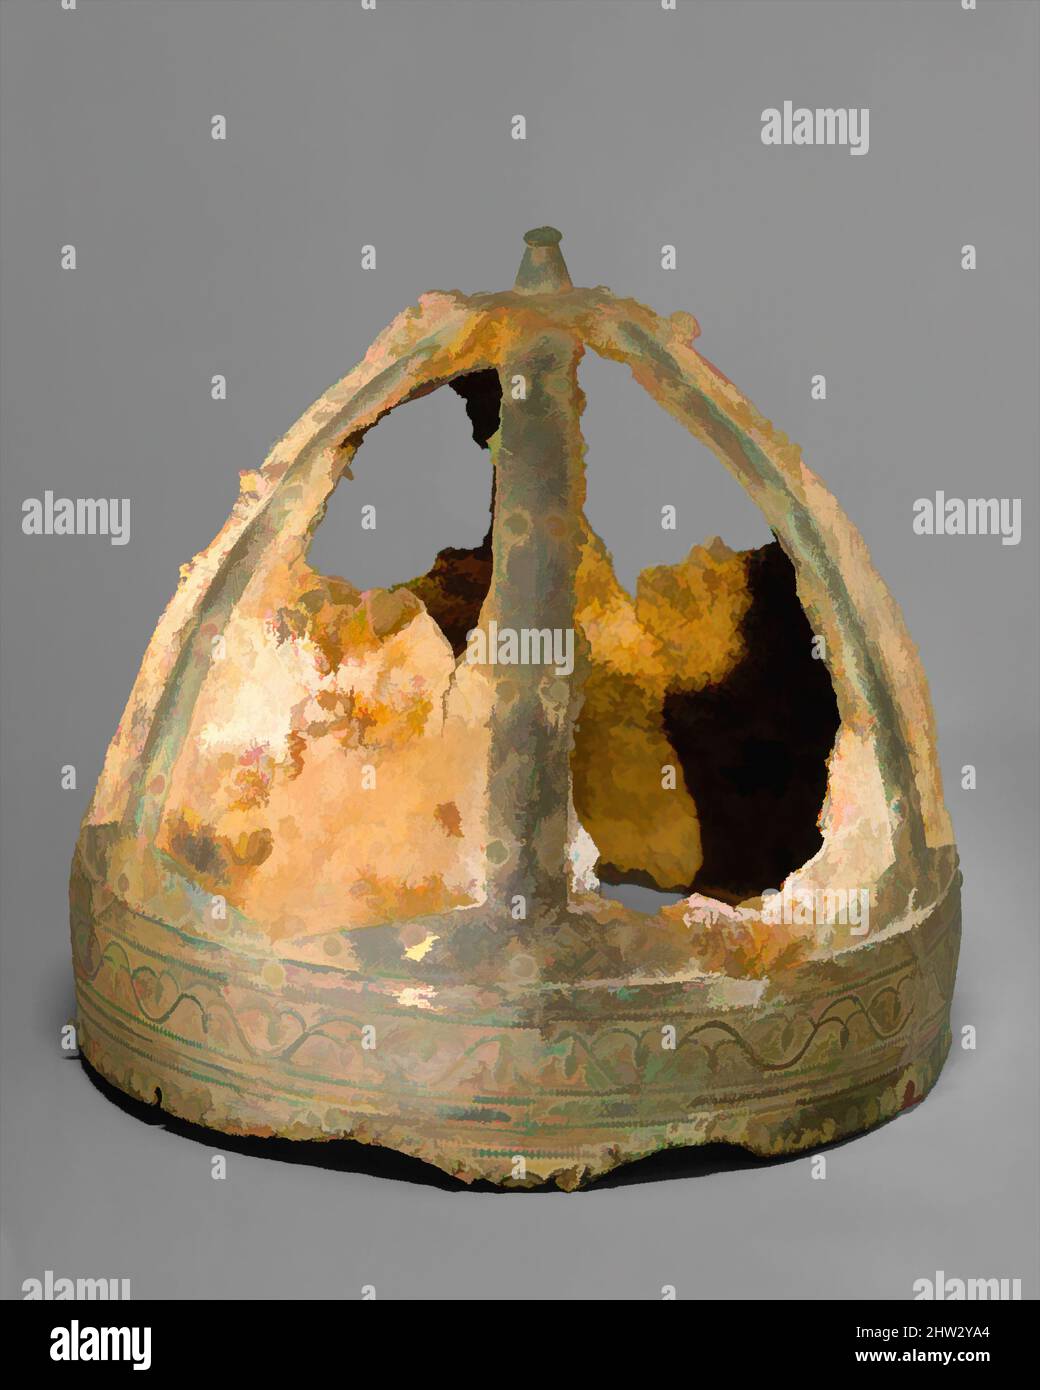 Art inspired by Helmet (Spangenhelm), 6th–7th century, Byzantine or Germanic, Iron, copper alloy, gold, H. 8 9/16 in. (21.8 cm); Diam. 7 13/16 in. (19.9 cm); Wt. 2 lb. (907 g), Helmets, This helmet comes from a small group of closely related Spangenhelme (strap helmets). The sites, Classic works modernized by Artotop with a splash of modernity. Shapes, color and value, eye-catching visual impact on art. Emotions through freedom of artworks in a contemporary way. A timeless message pursuing a wildly creative new direction. Artists turning to the digital medium and creating the Artotop NFT Stock Photo